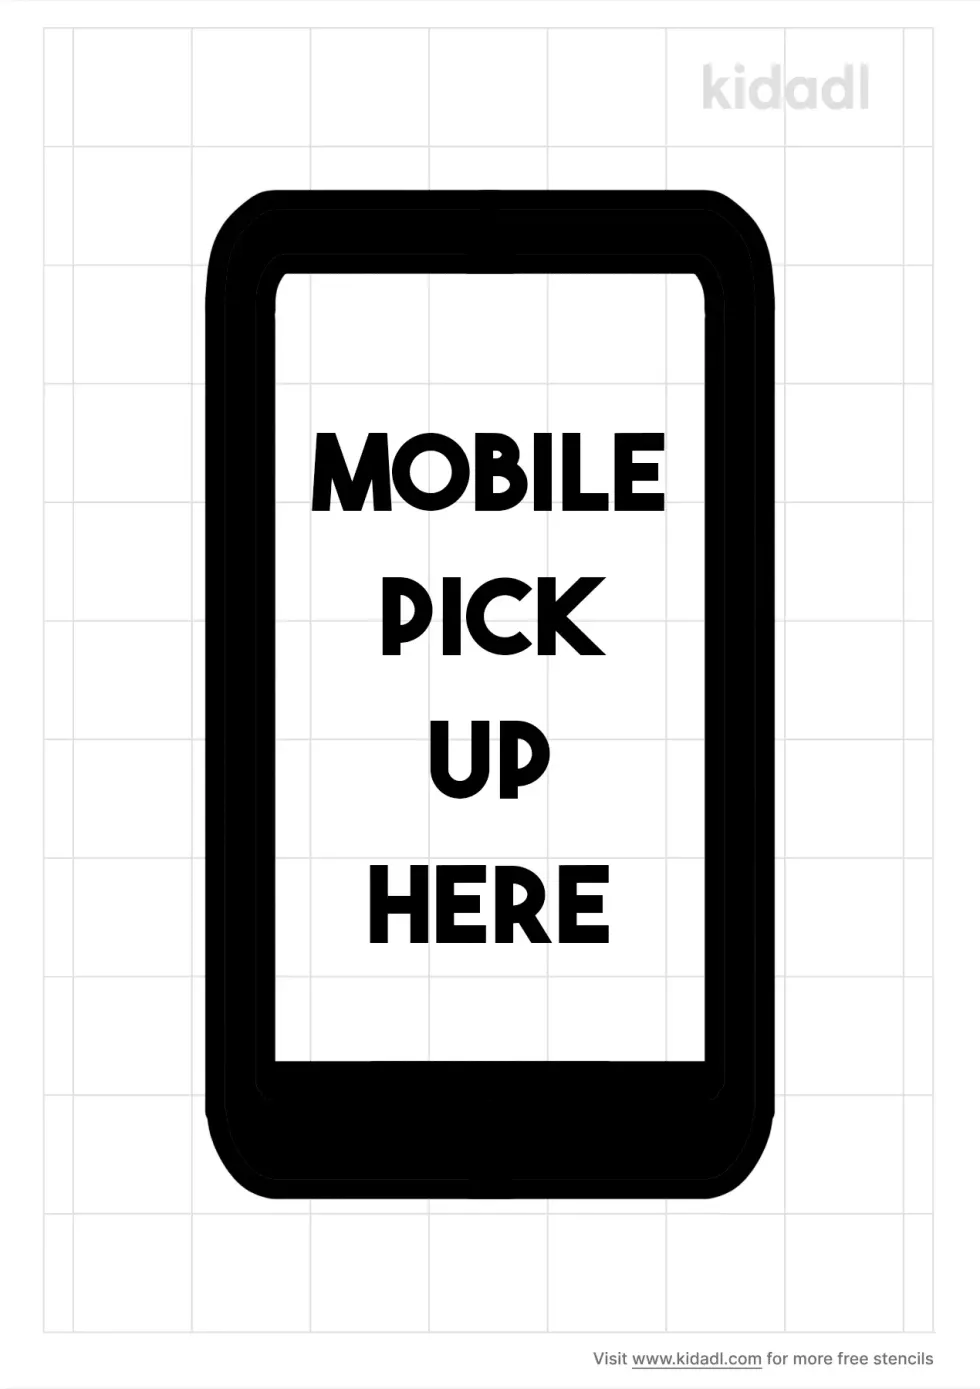 Mobile Pick Up Here Stencil